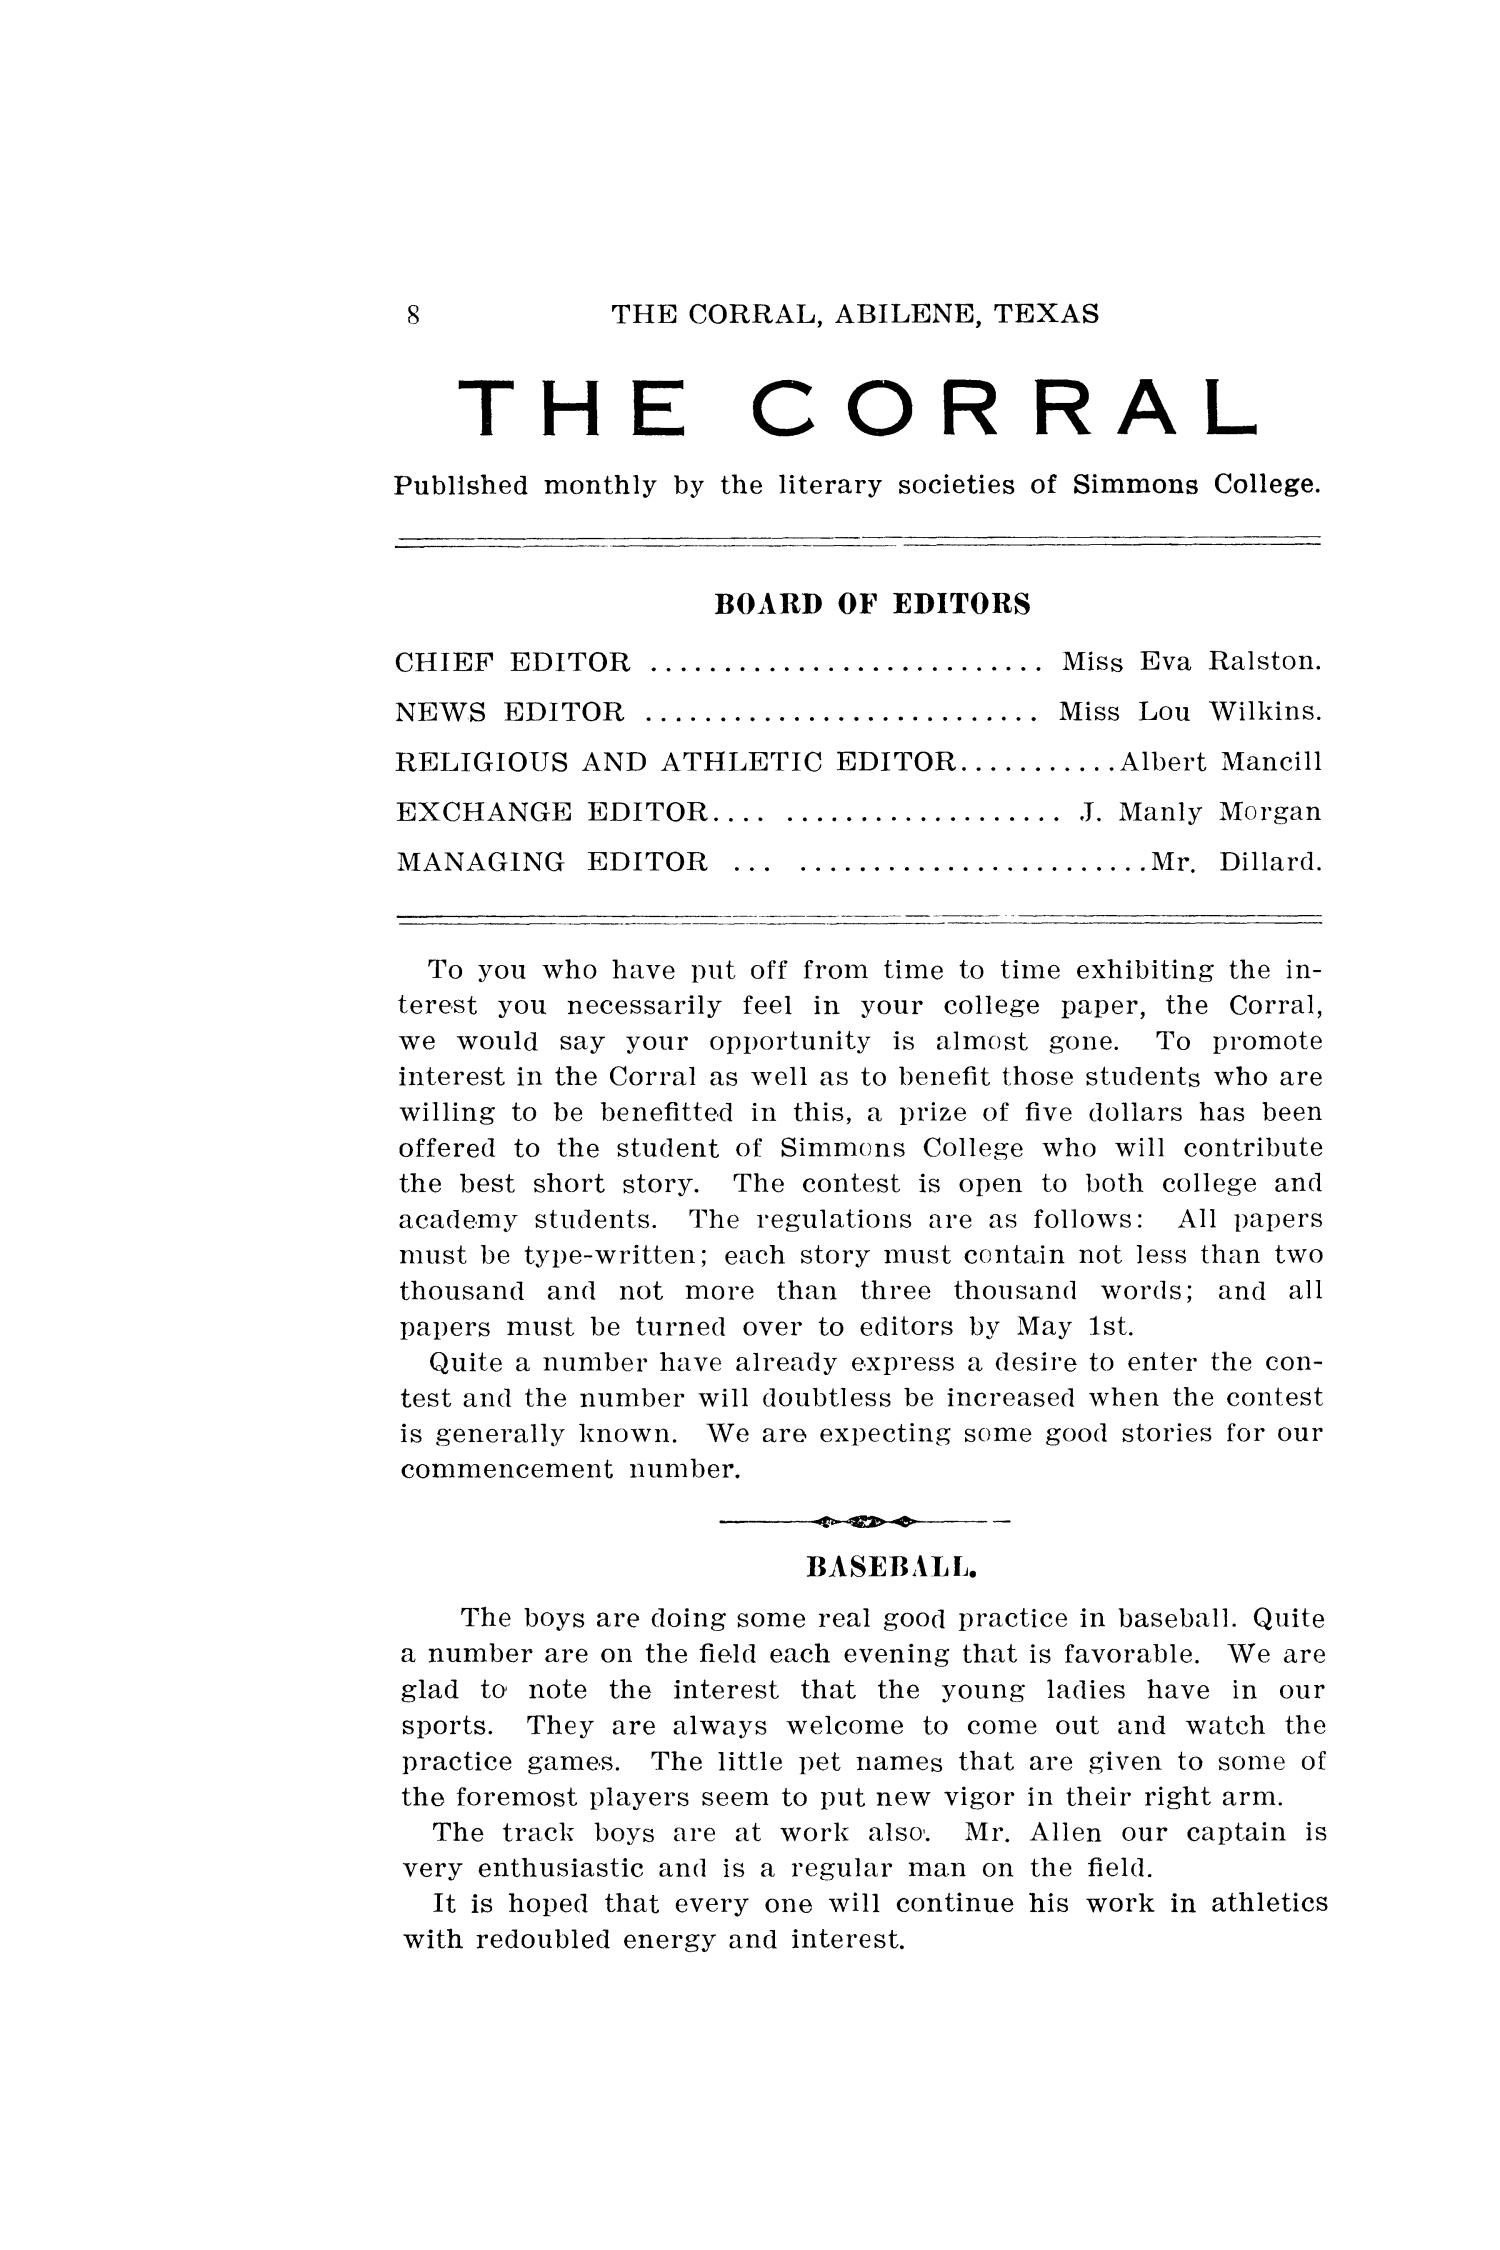 The Corral, Volume 1, Number 6, March, 1908
                                                
                                                    8
                                                